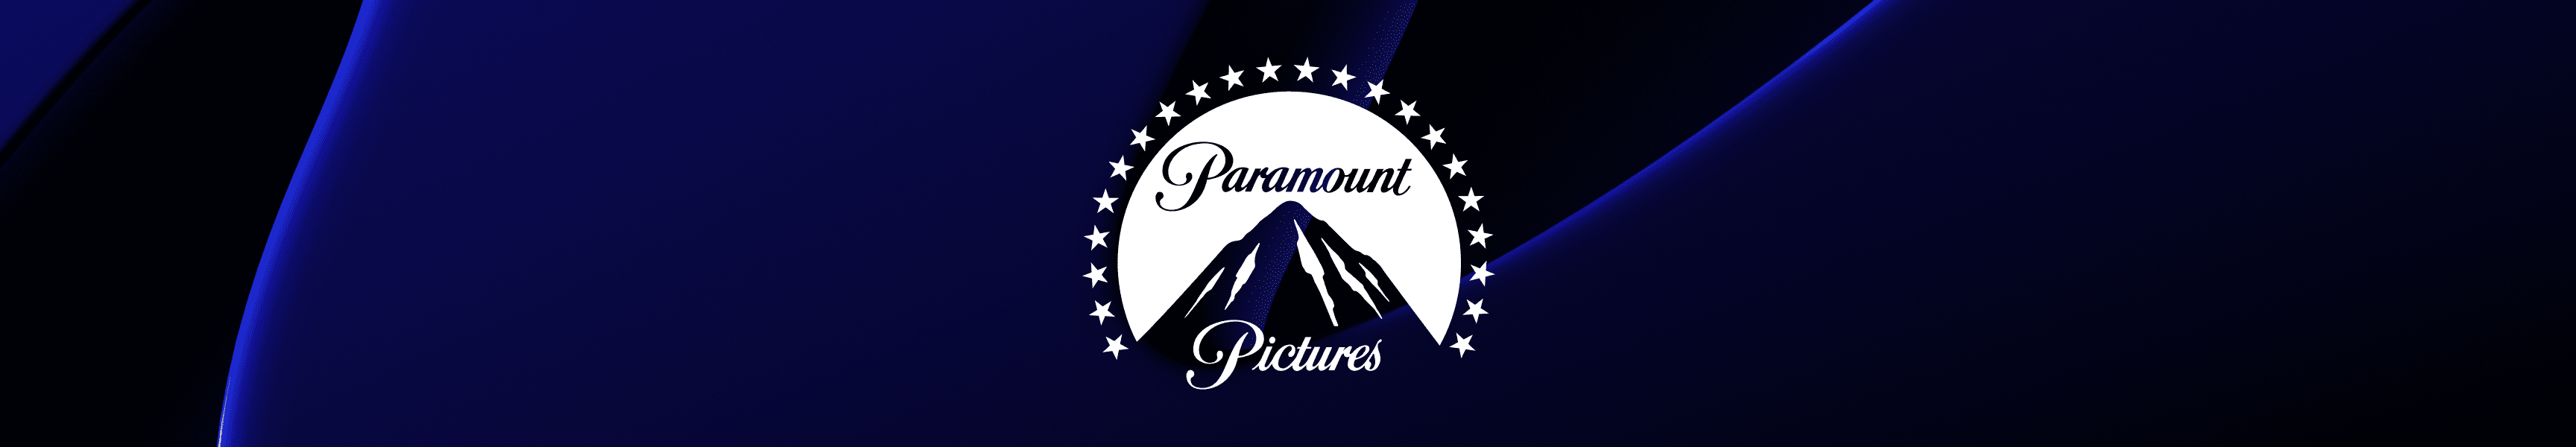 Paramount Pictures Pósters